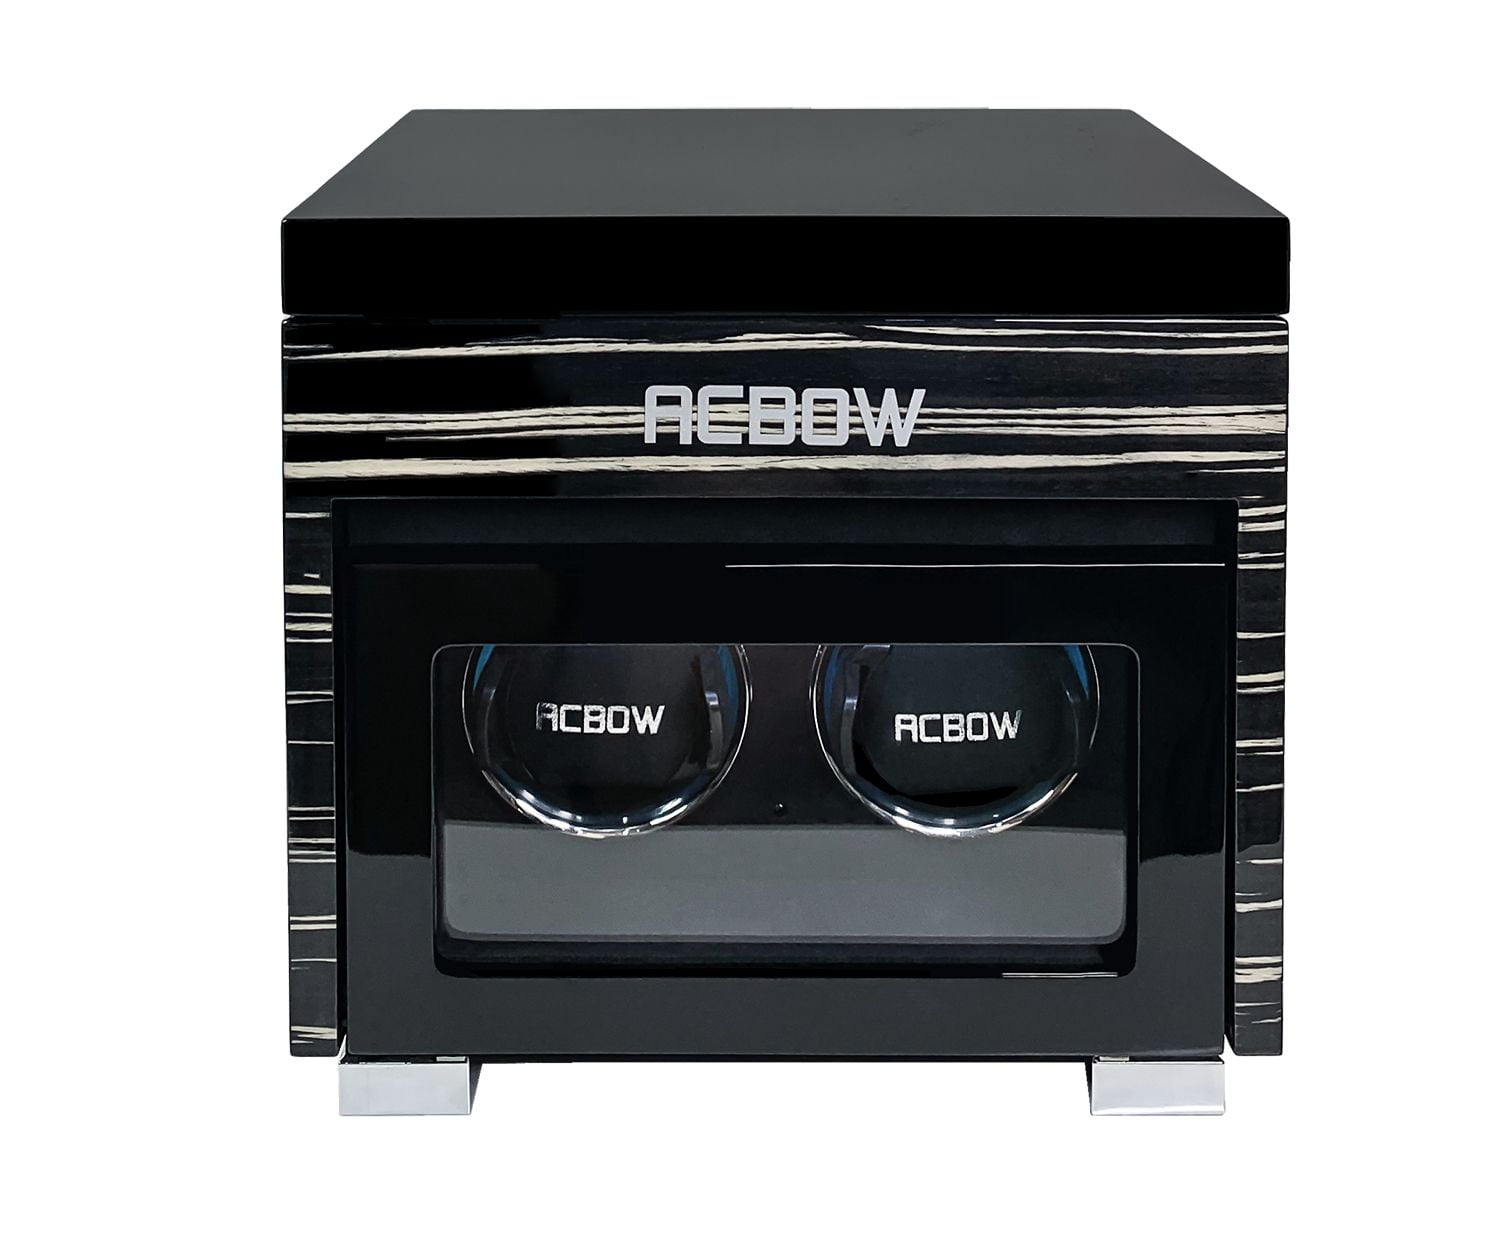 Hộp Đồng Hồ Cơ ACBOW IW0204 - (2 Xoay + 4 Tĩnh)